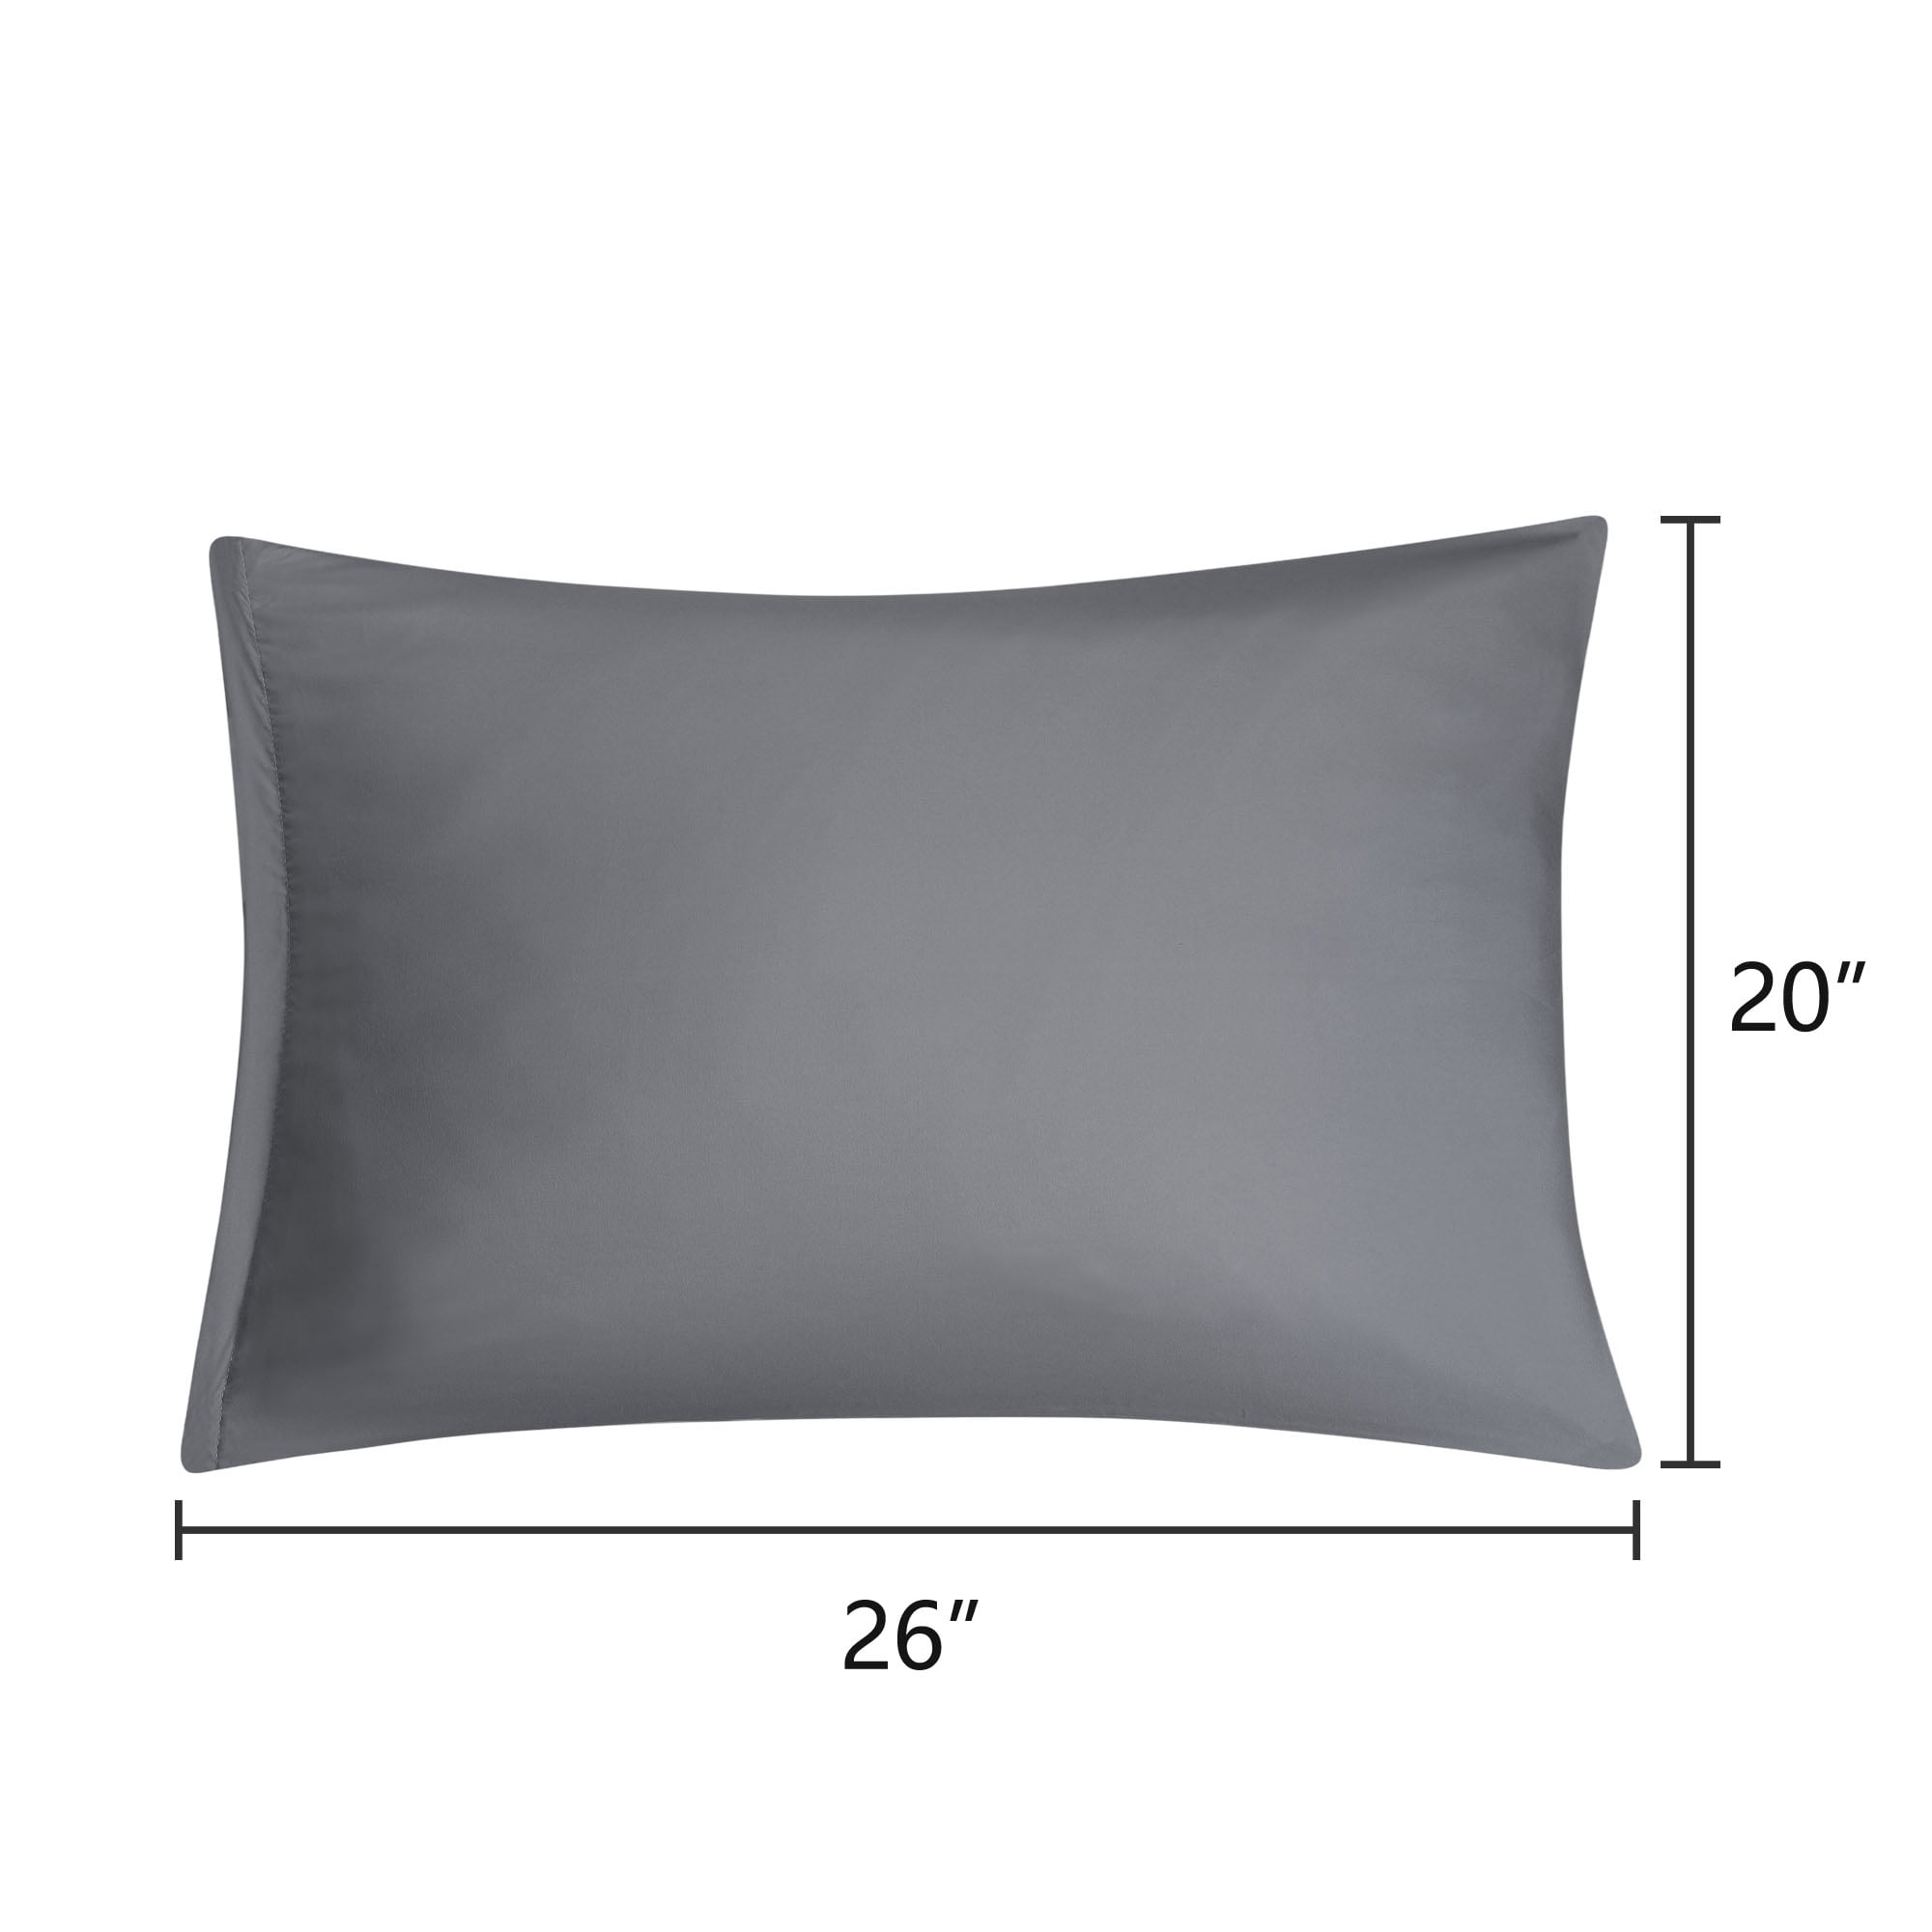 Grey Pillowcases Soft Microfiber Pillow Case Cover with Zipper Standard ...